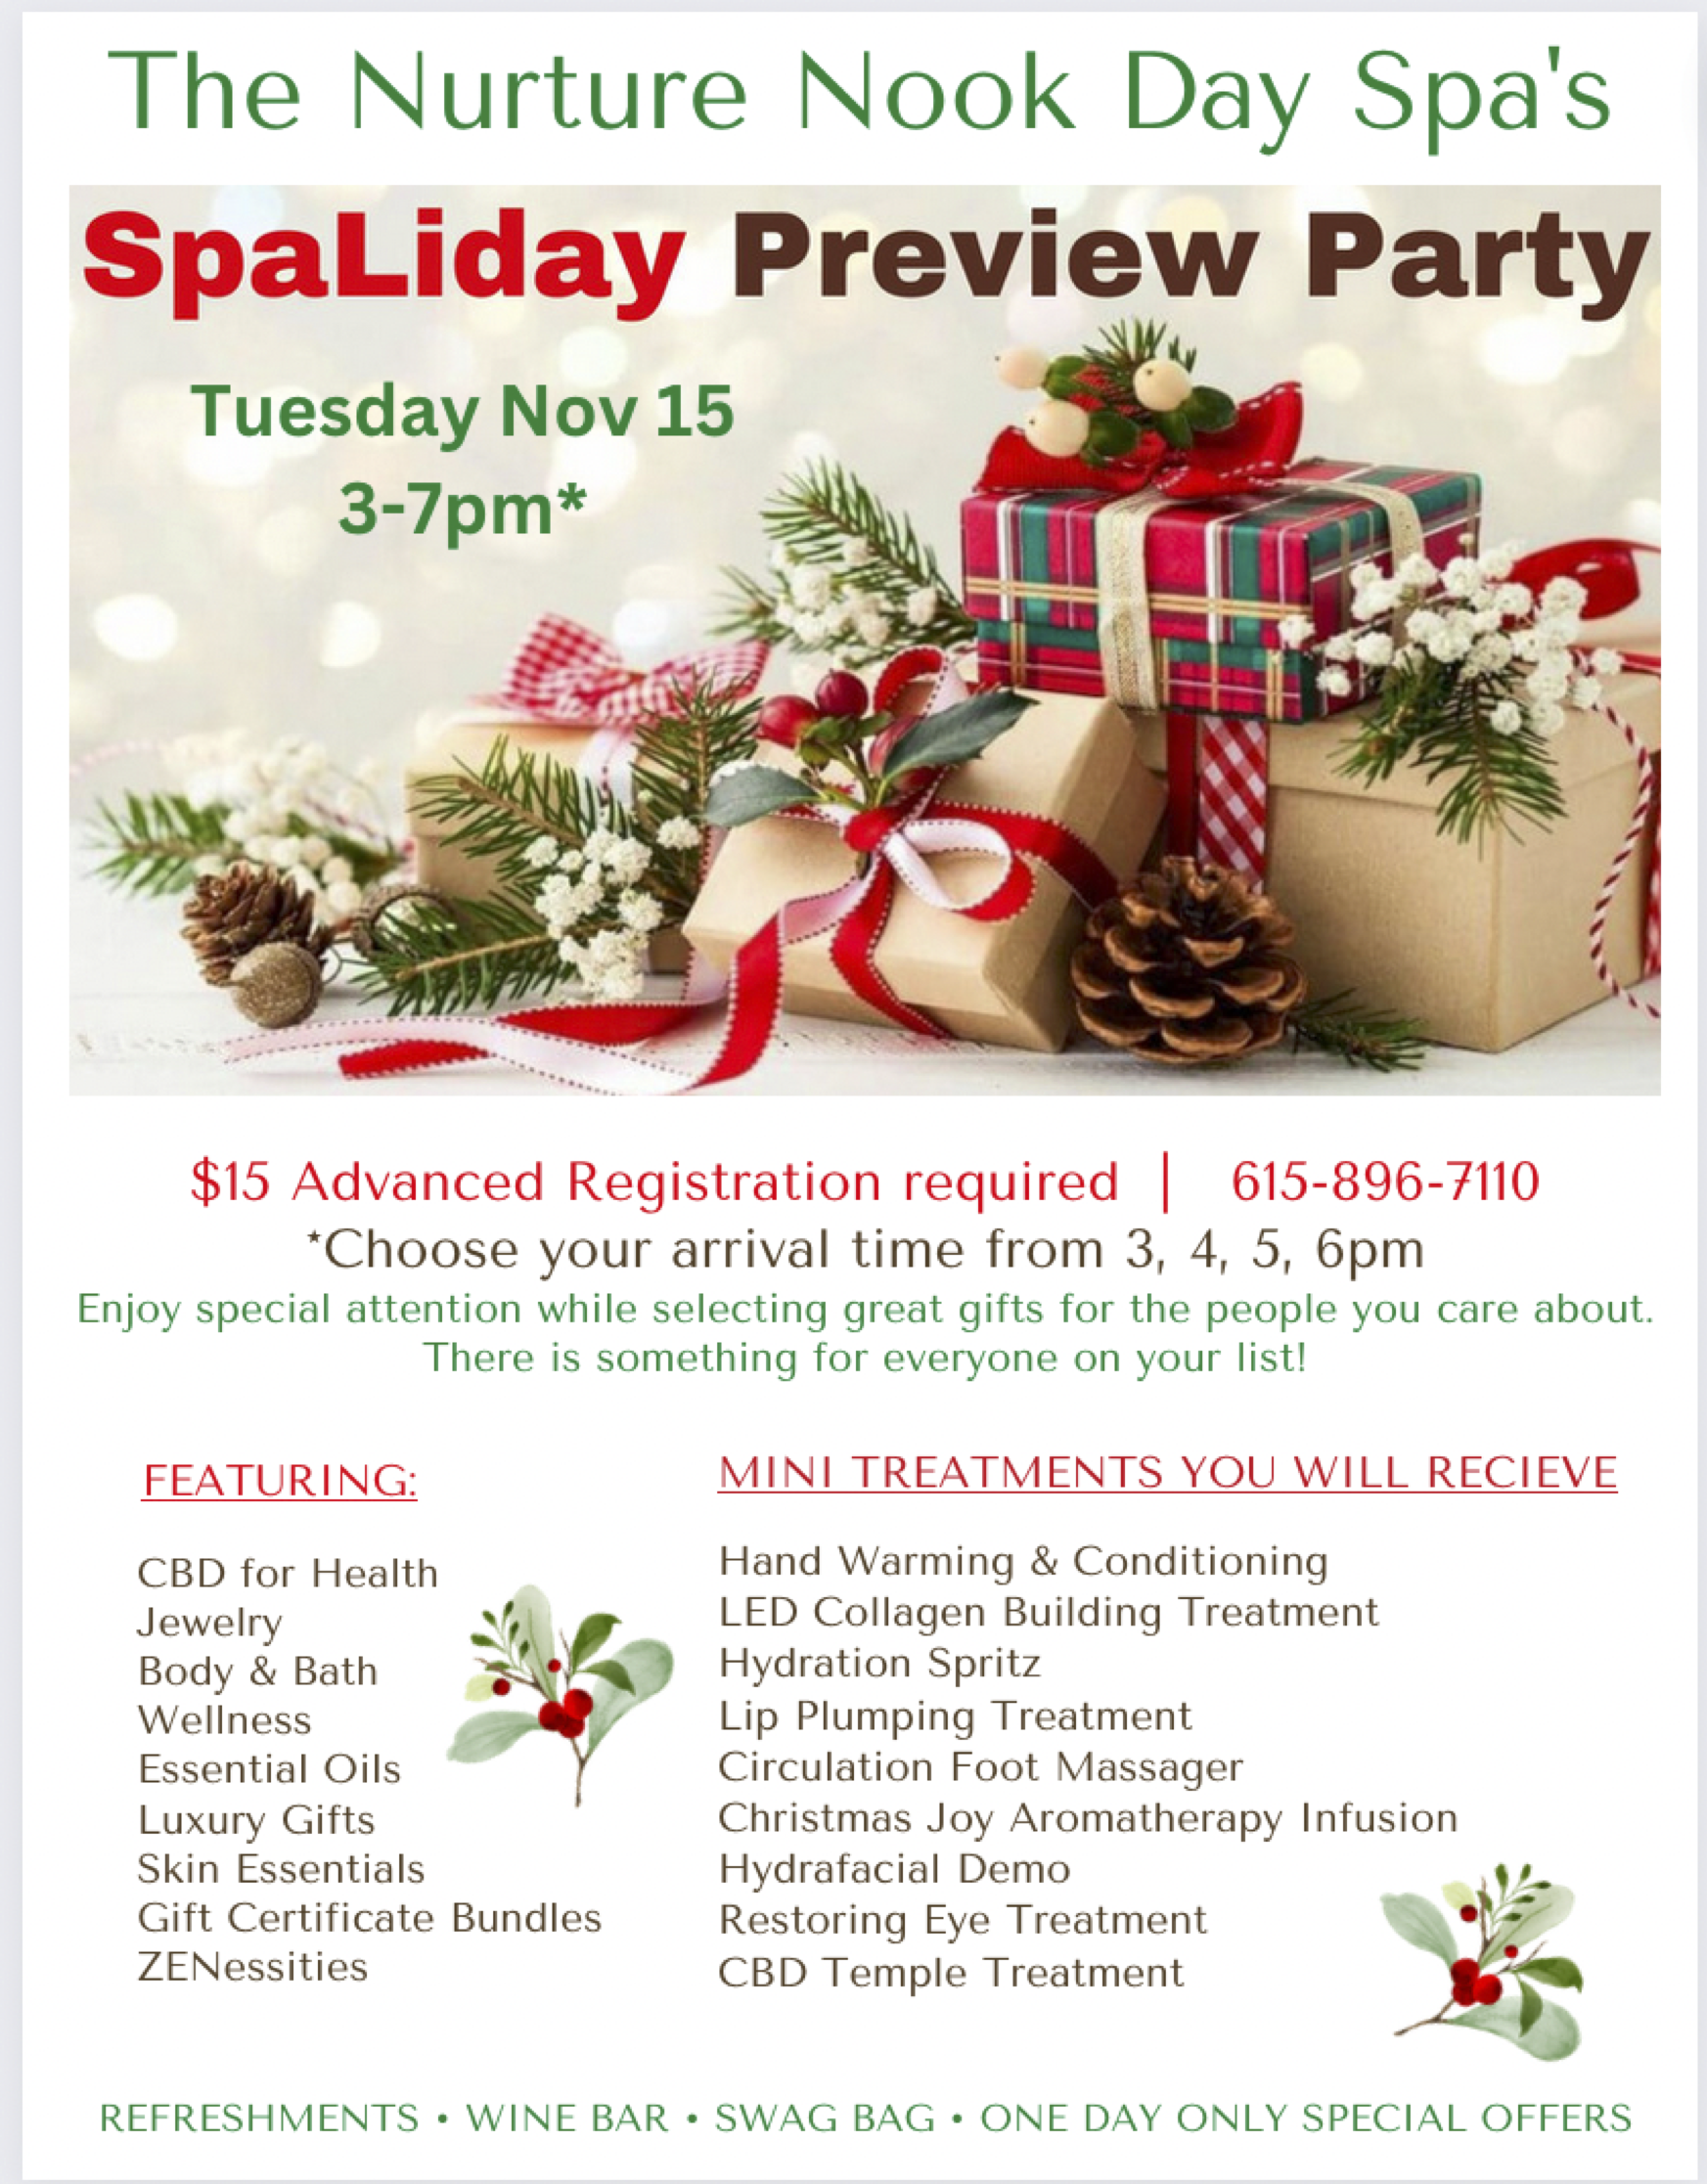 Spaliday Preview Party